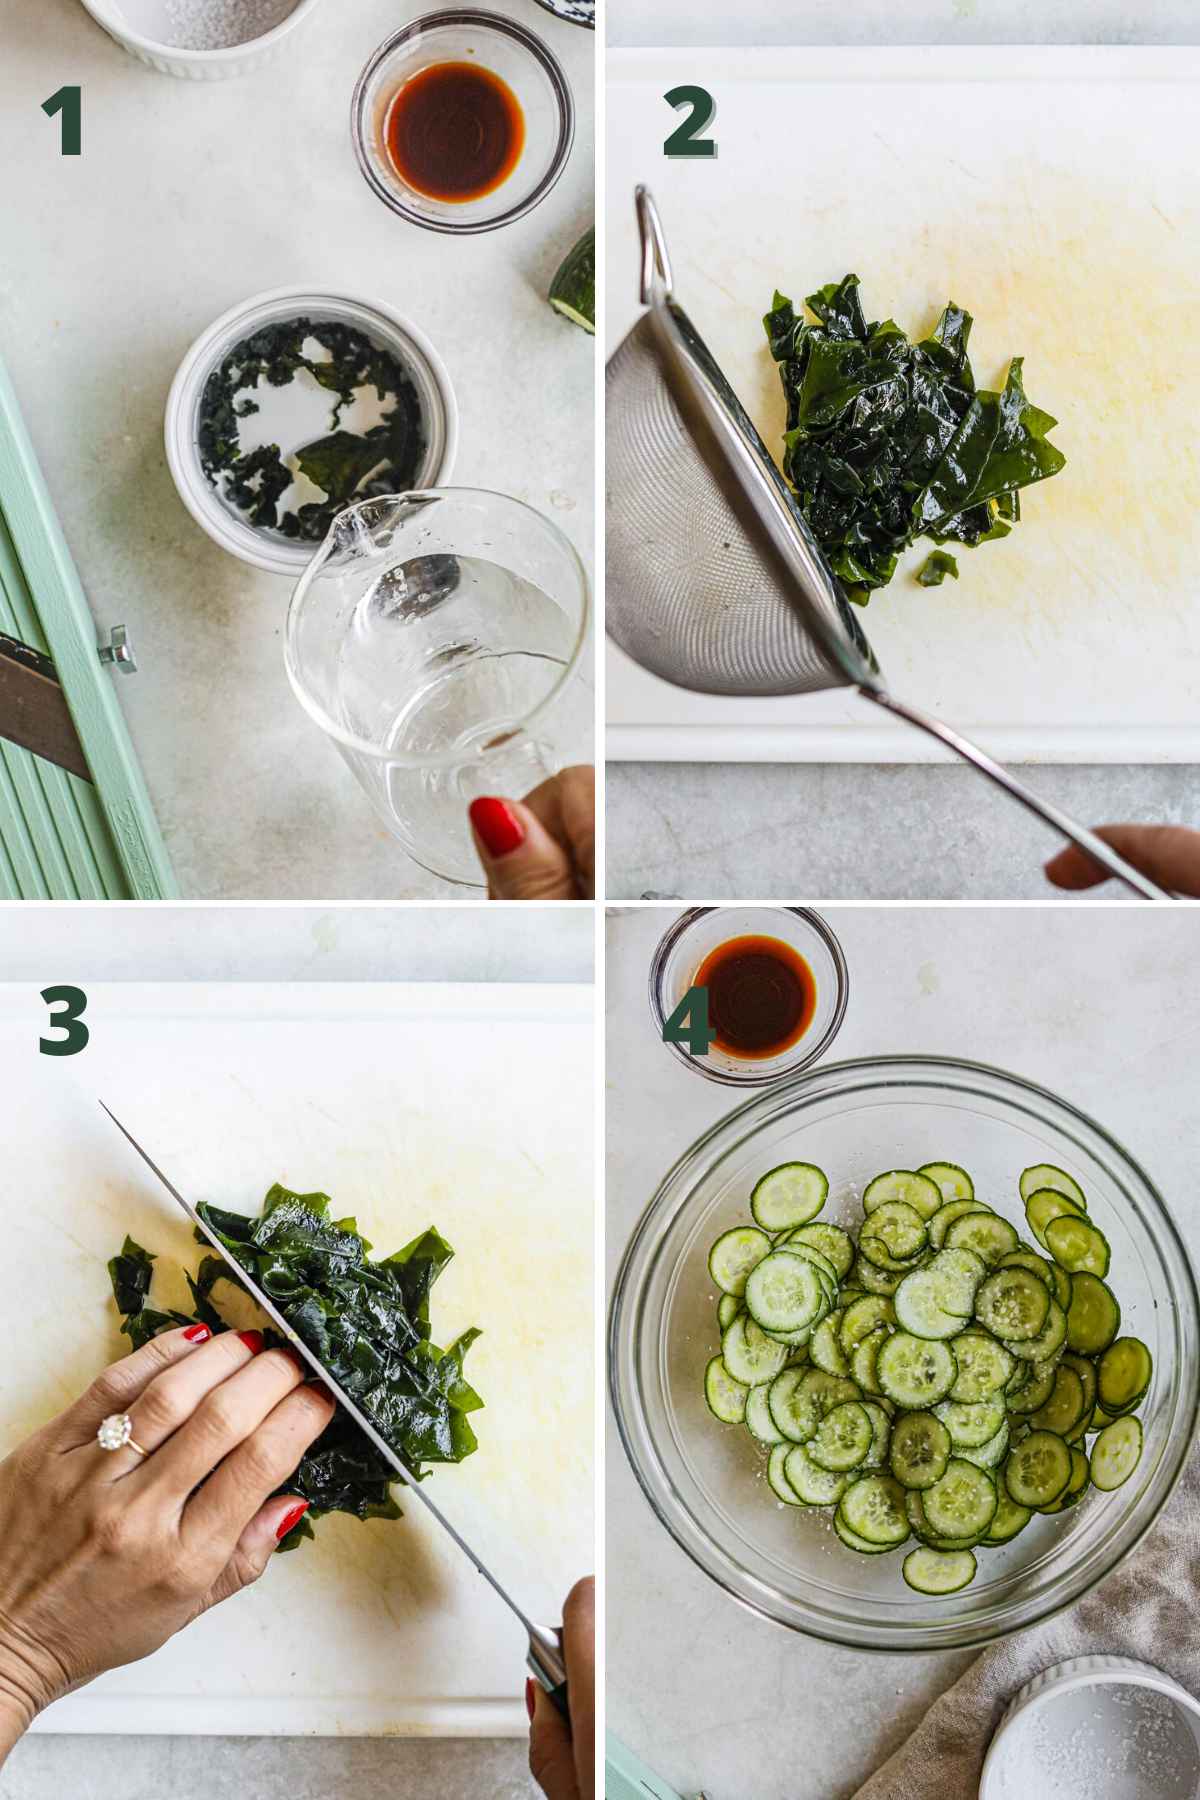 Step to make sunomono (Japanese cucumber salad), soaking wakame, cutting wakame into bite sized pieces, and salting cucumber slices.